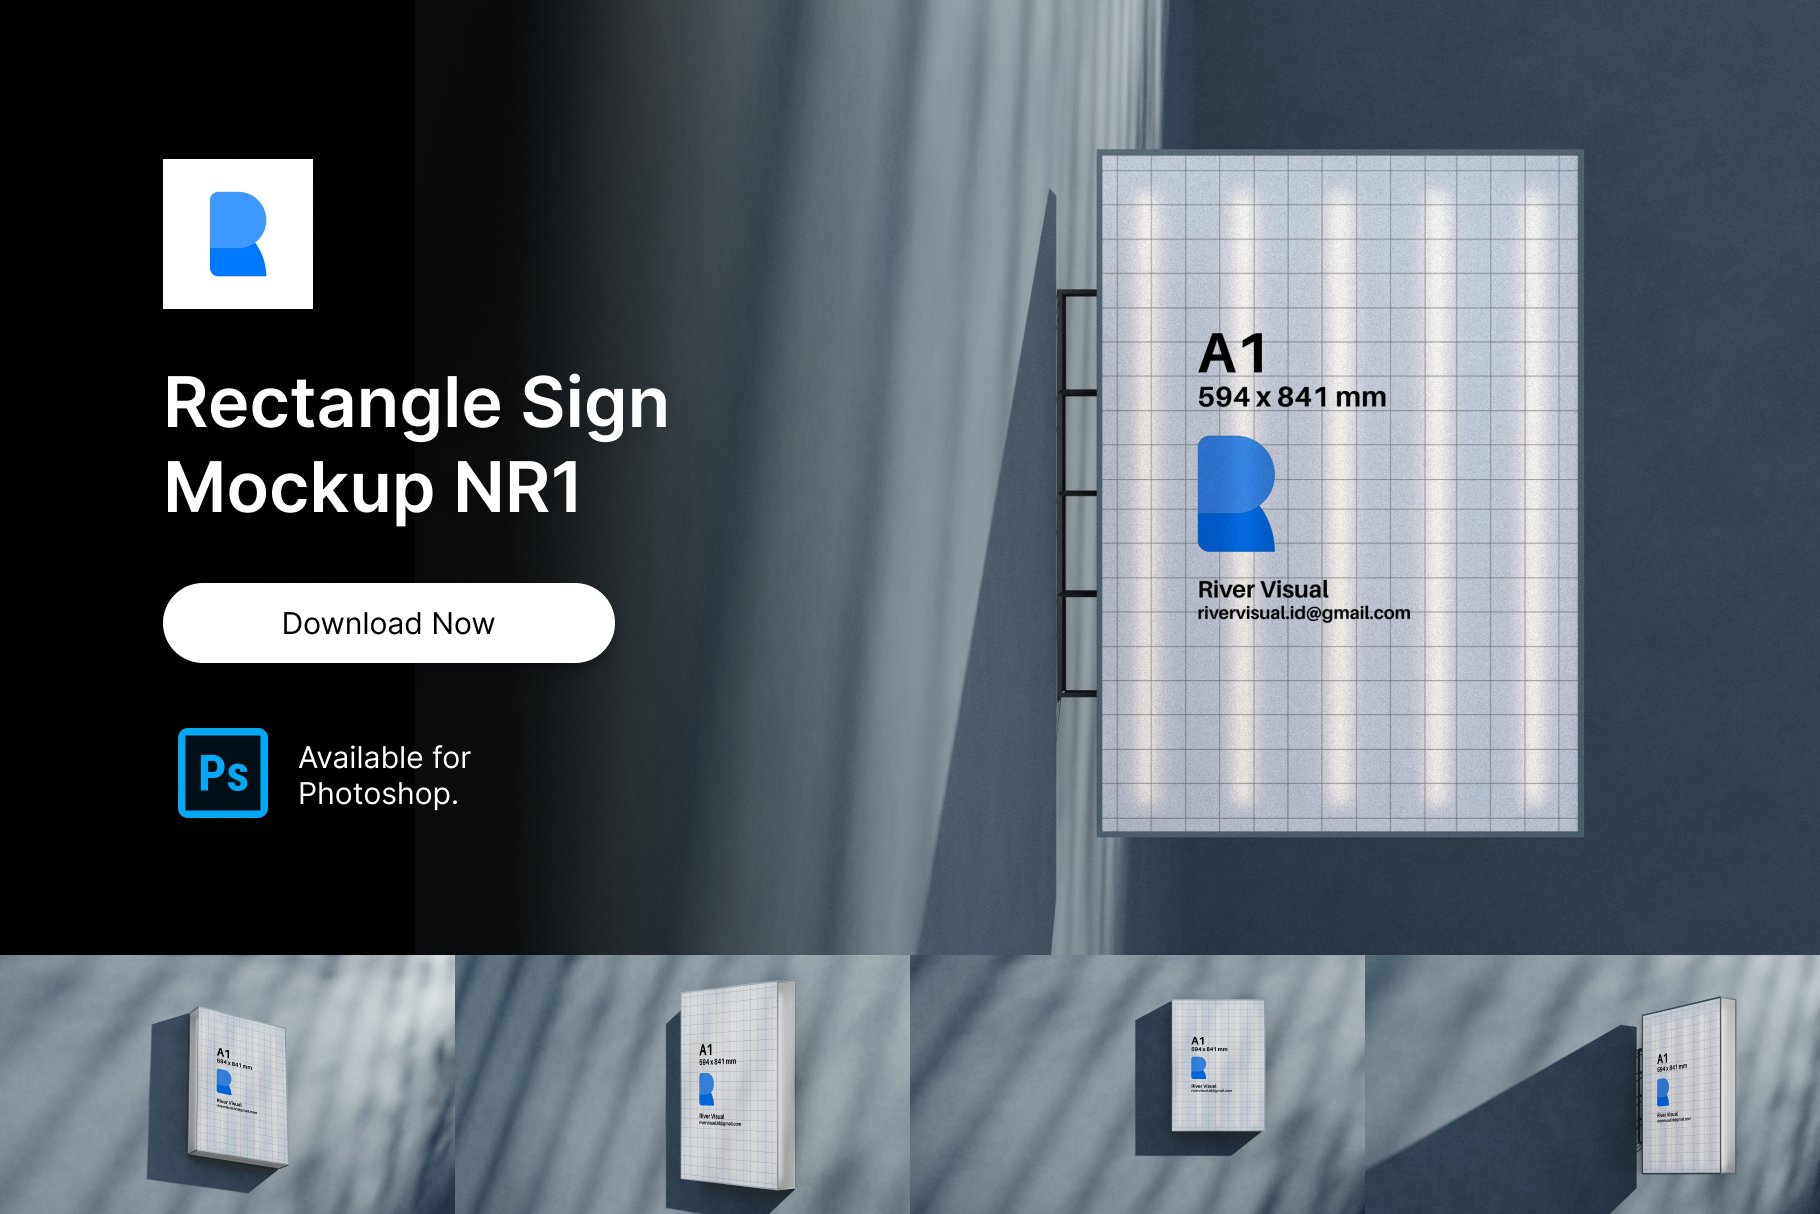 Rectangle Sign Mockup NR 1 cover image.